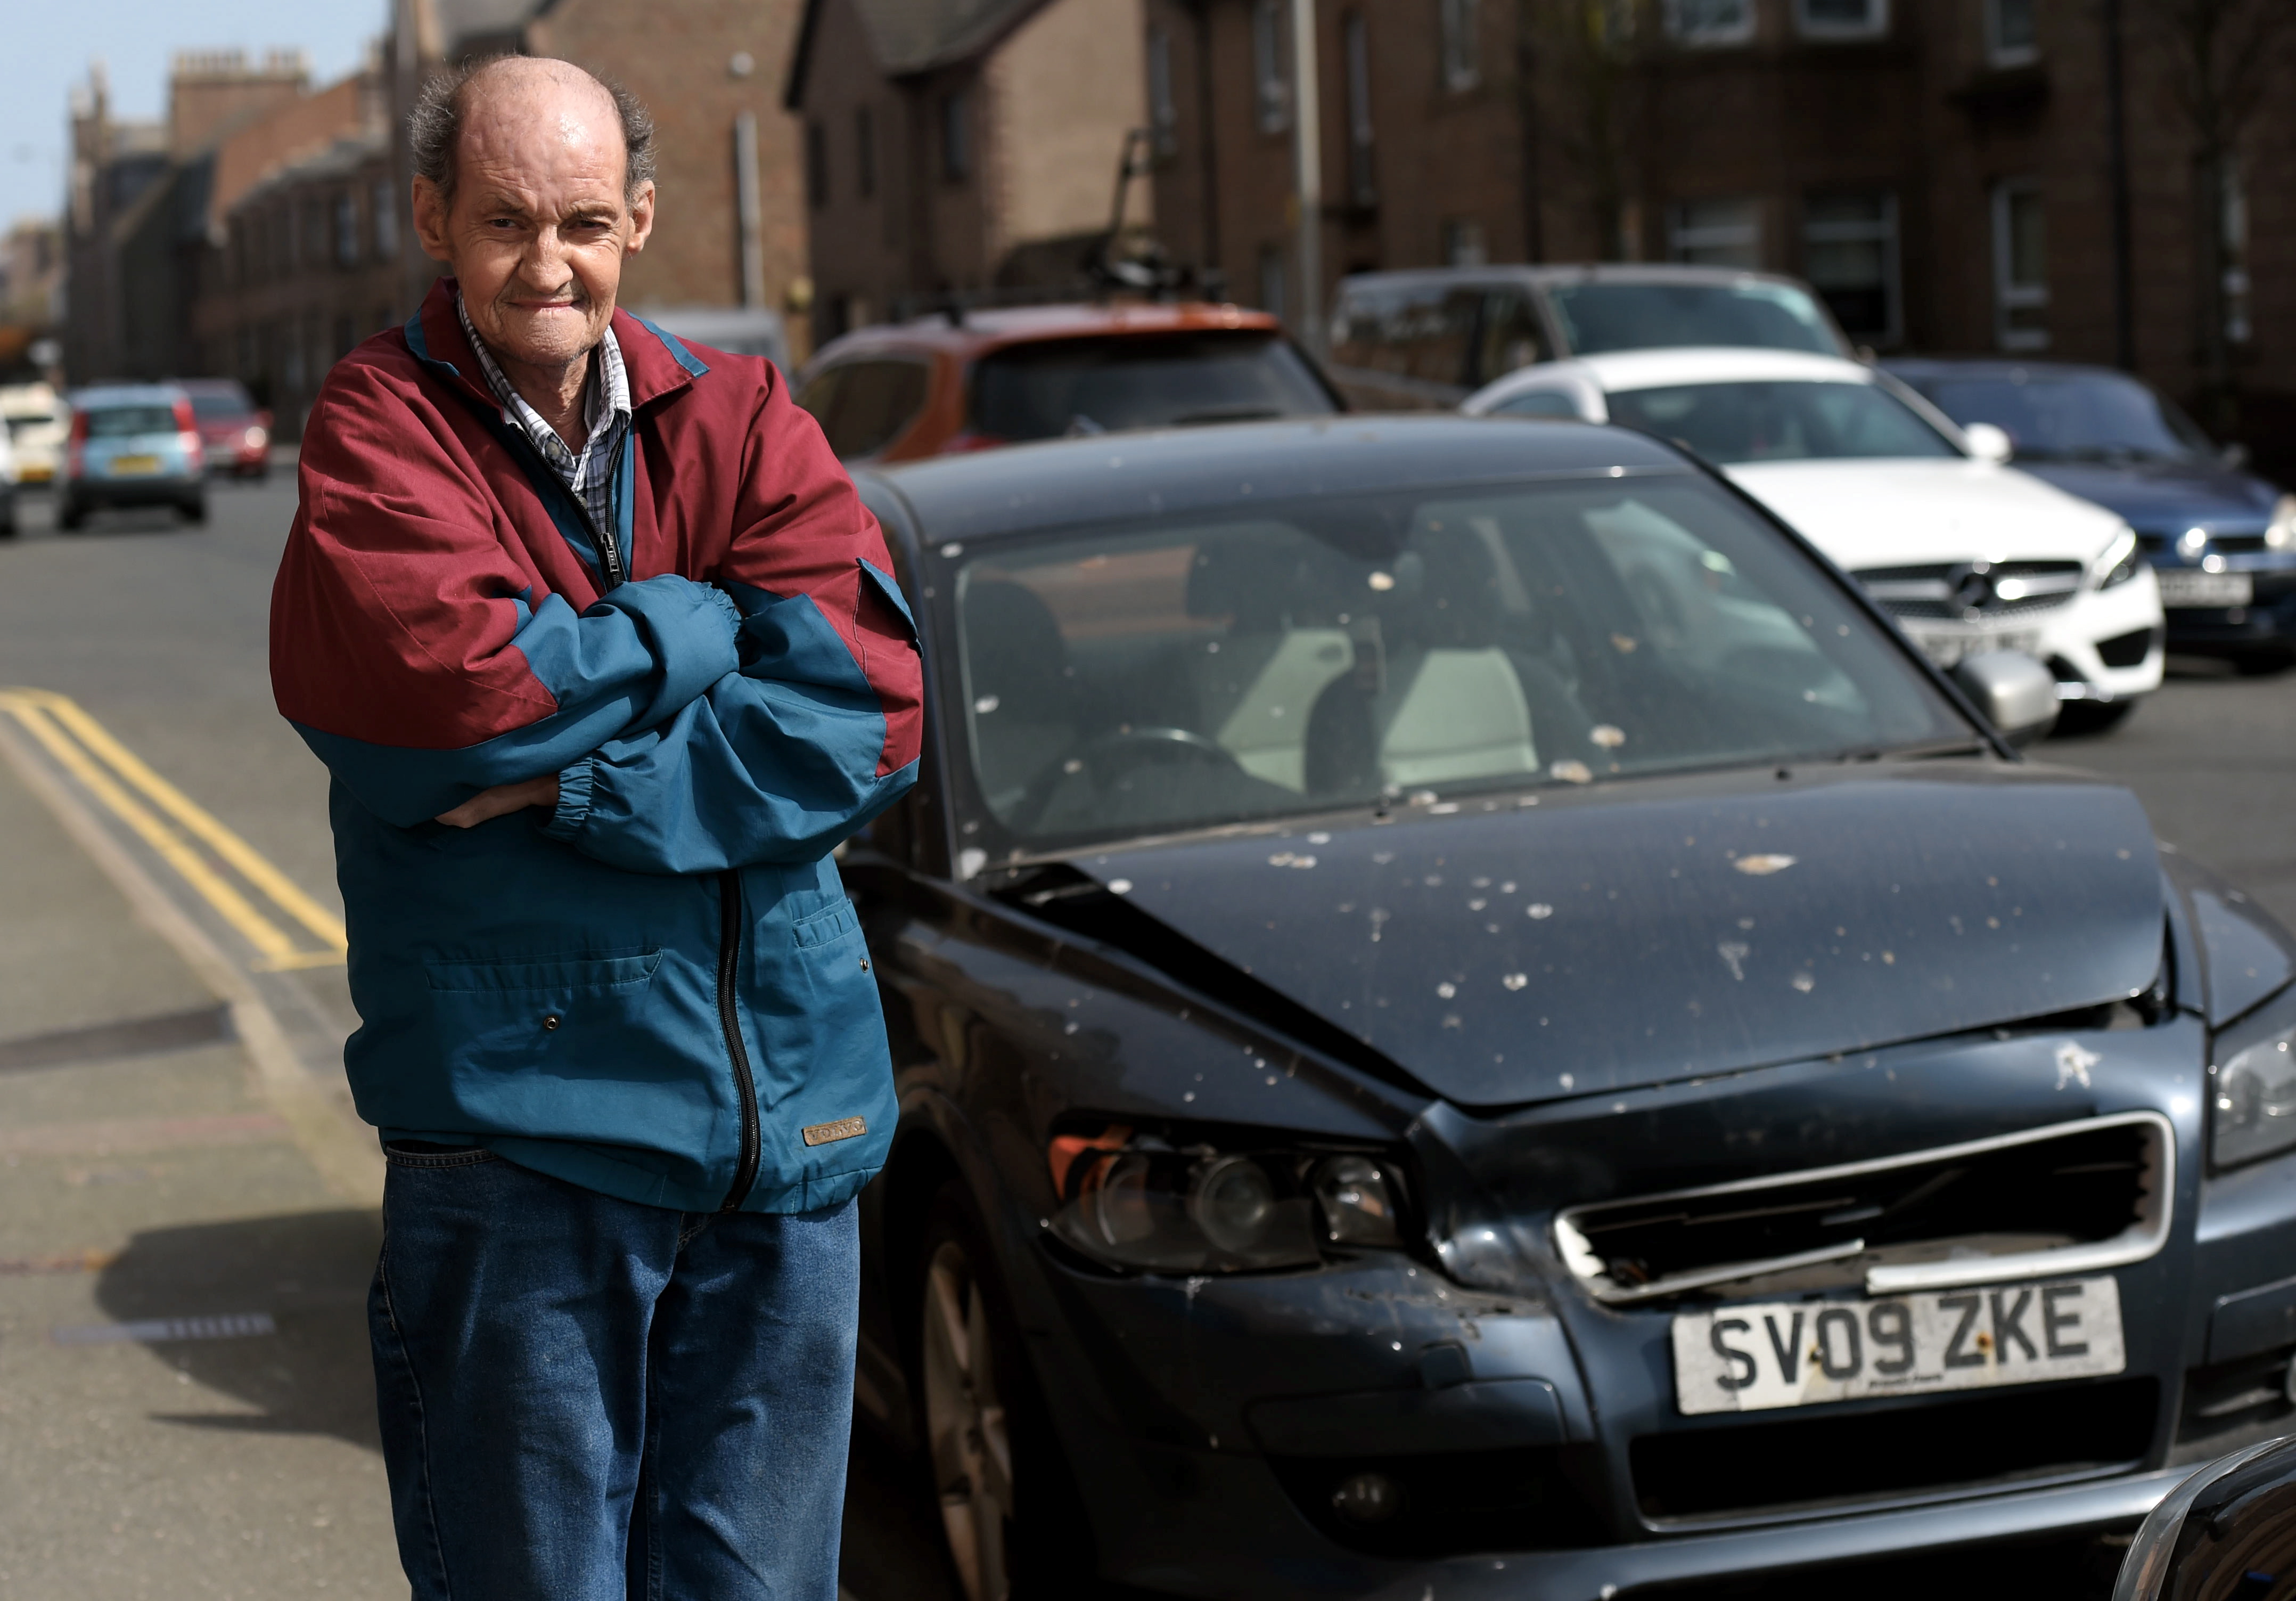 Eric Dean, 69, is unhappy with Aberdeenshire Council after he raised concerns about the broken down Volvo left near his home in King Street.